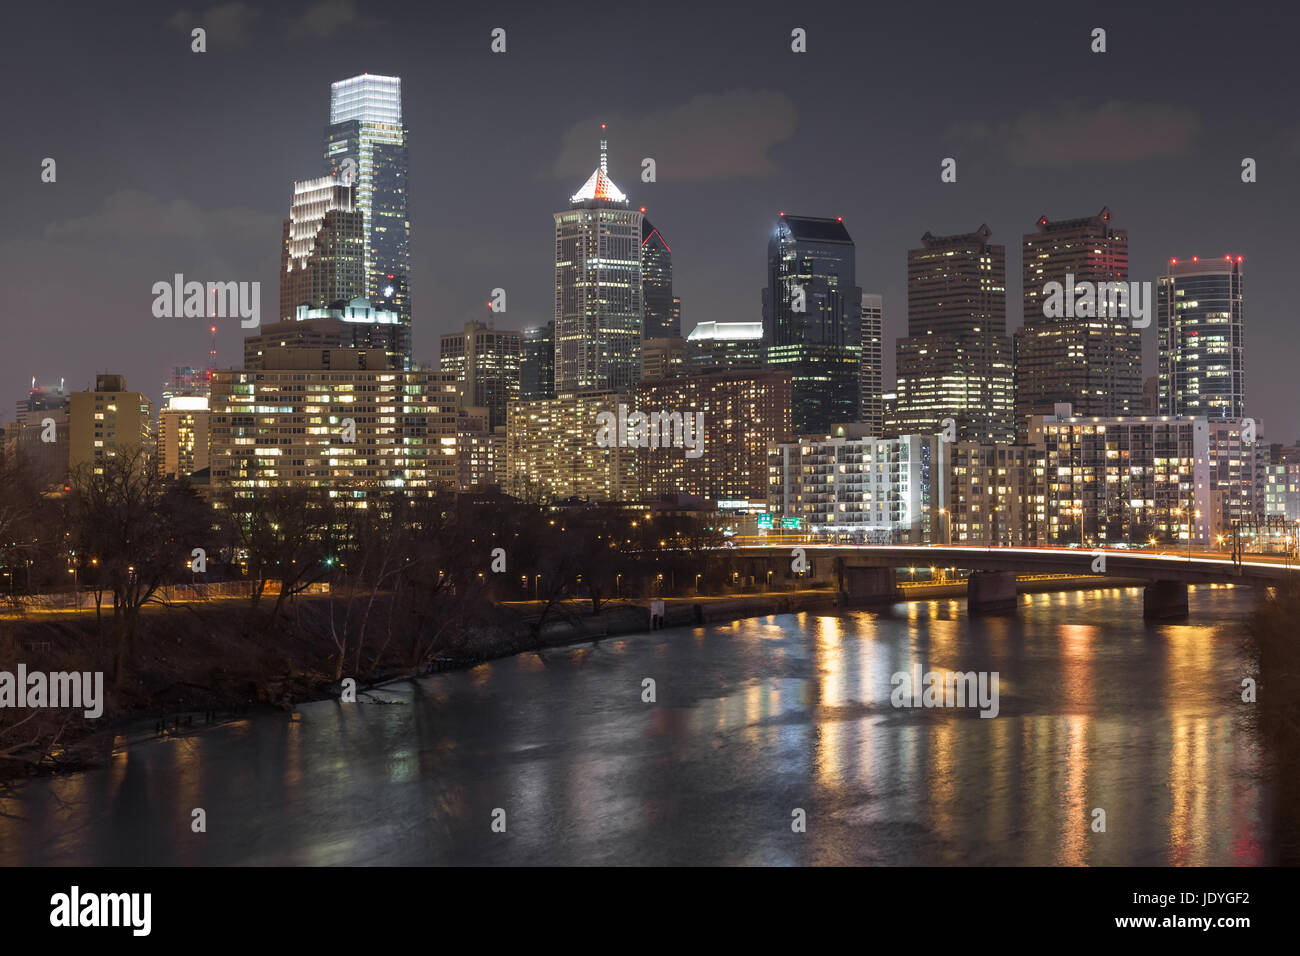 Skyline of center city Philadelphia at night with Schuylkill River in foreground Stock Photo